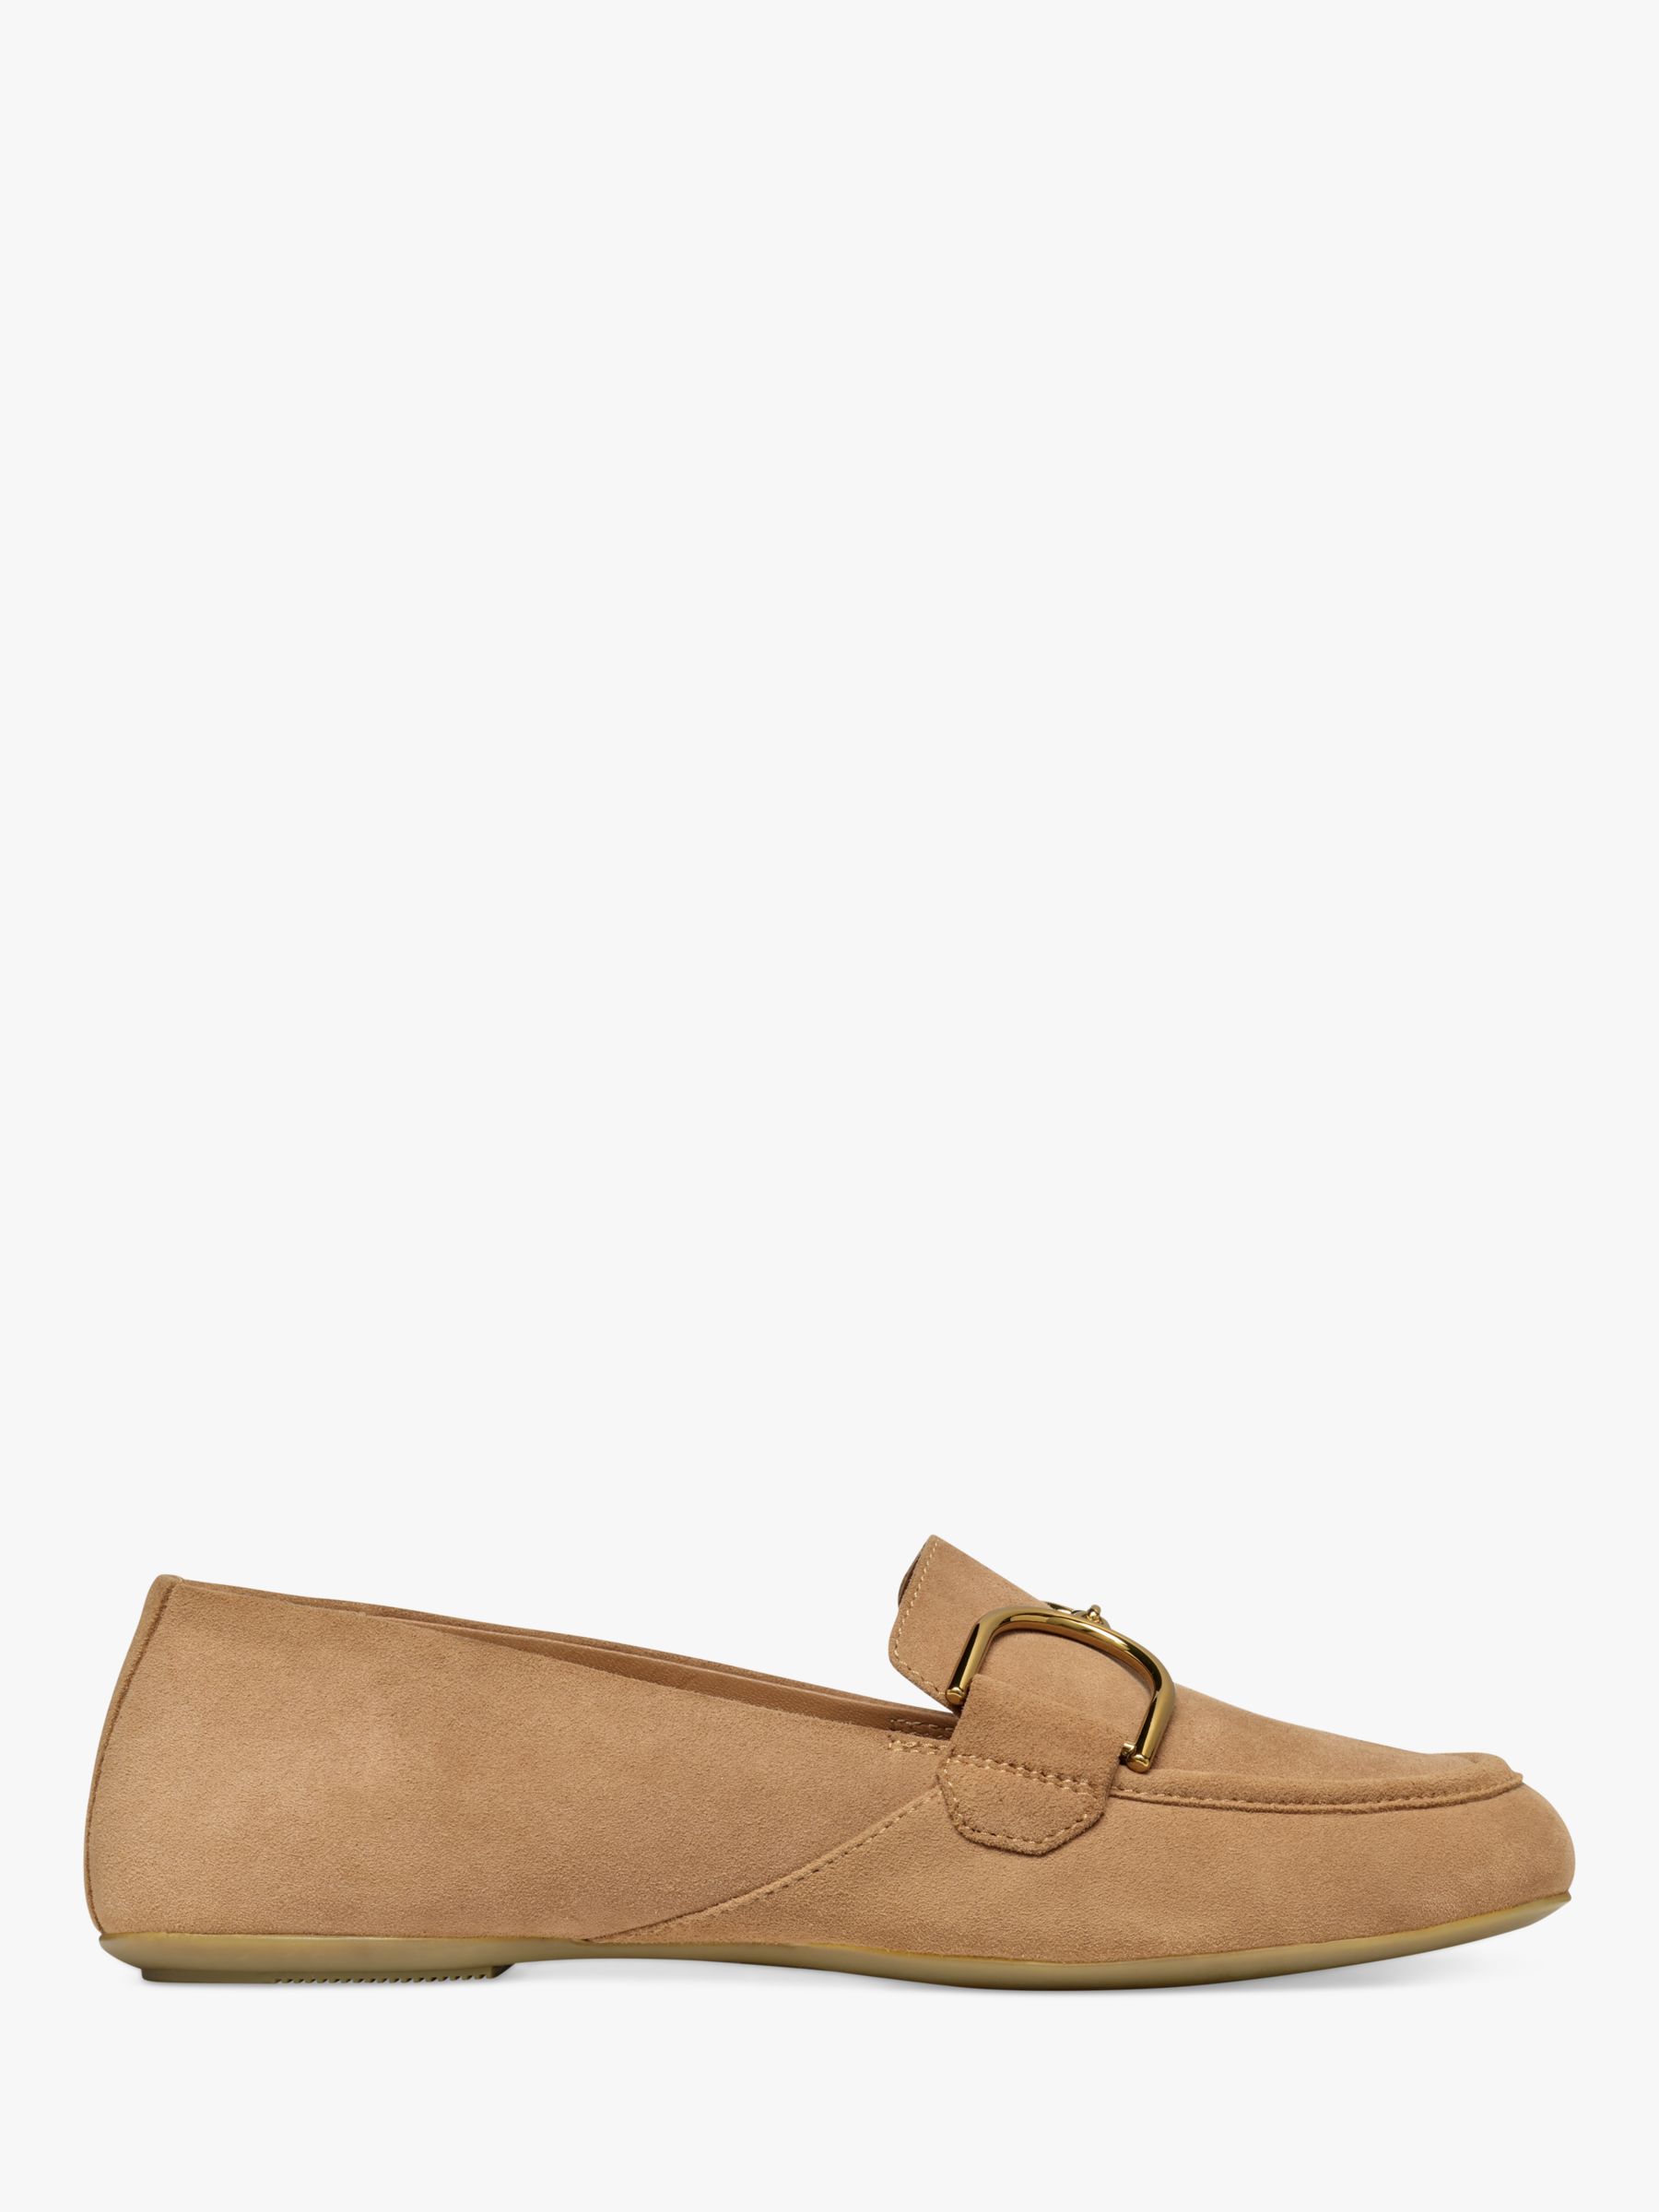 Geox Palmaria Suede Loafers, Cognac at John Lewis & Partners